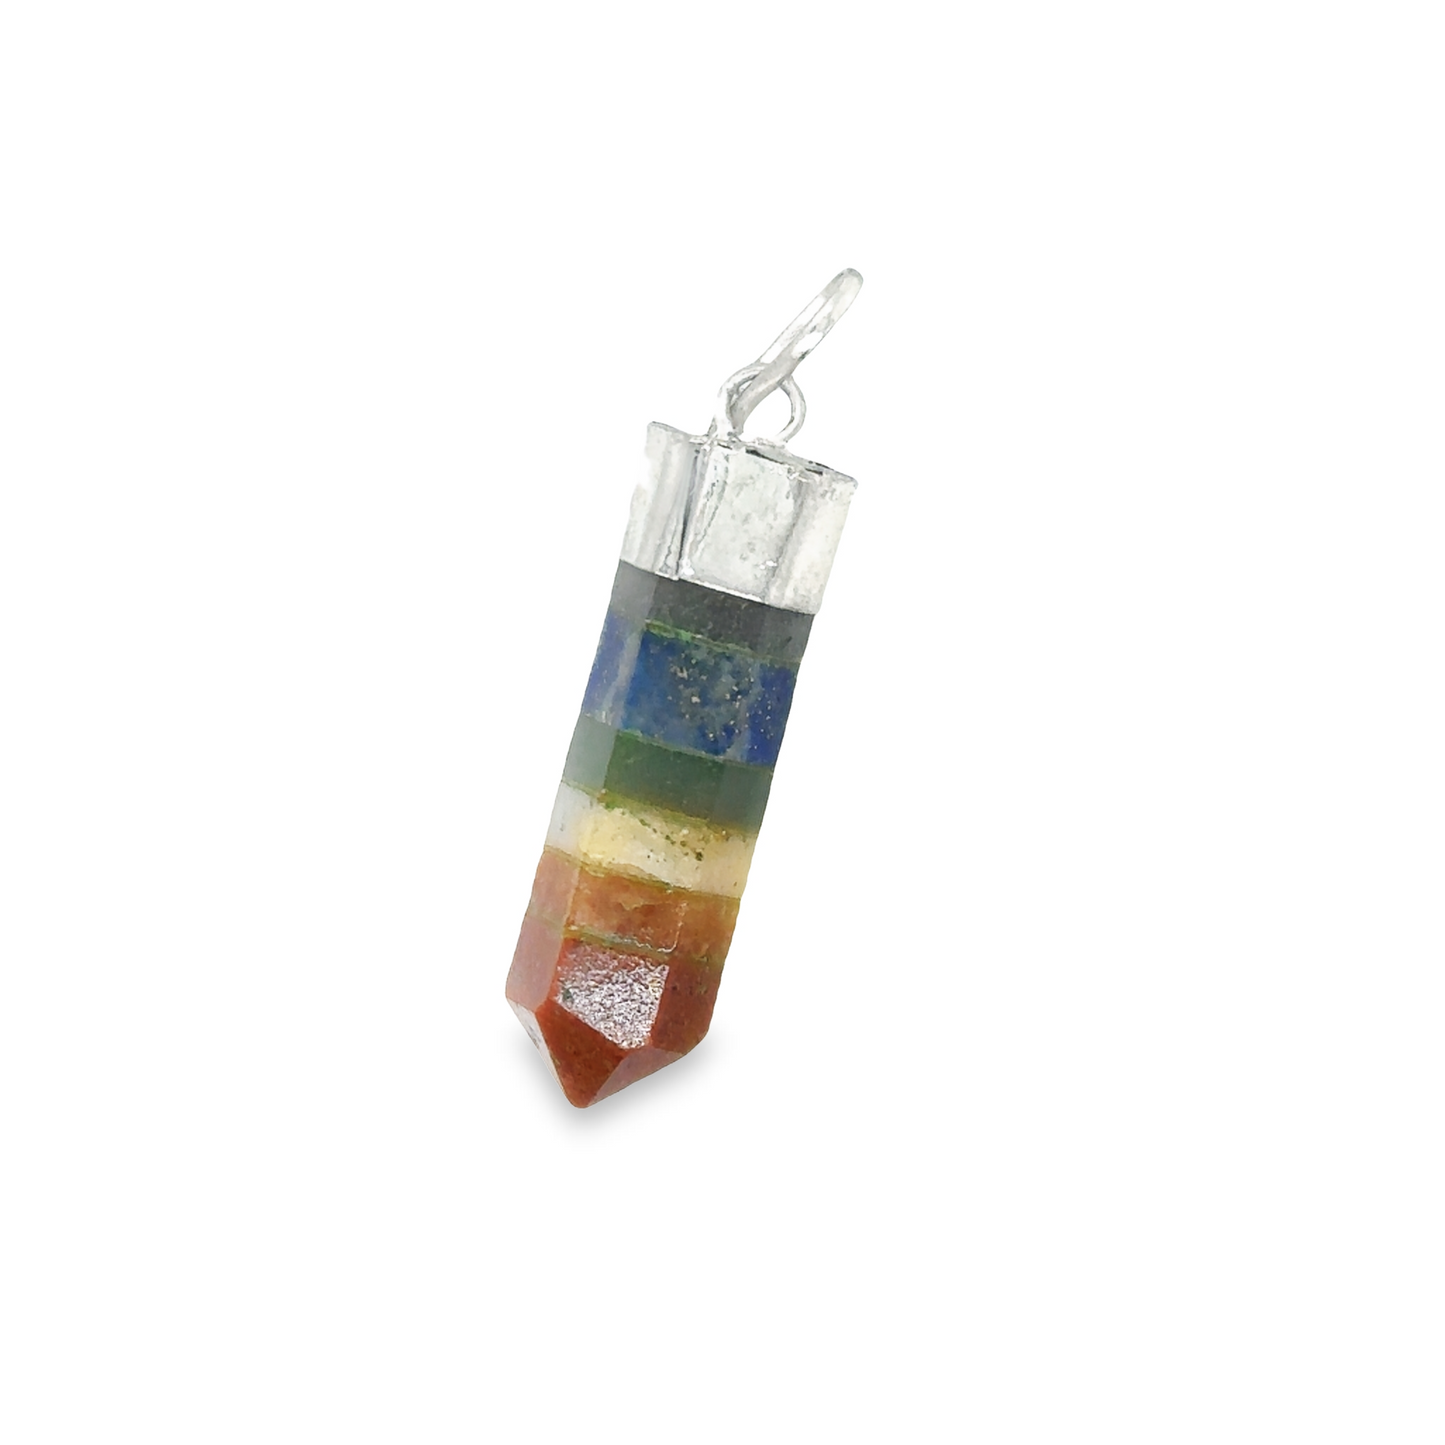 A Super Silver Chakra Crystal Point Pendant on a white background, radiating energy.